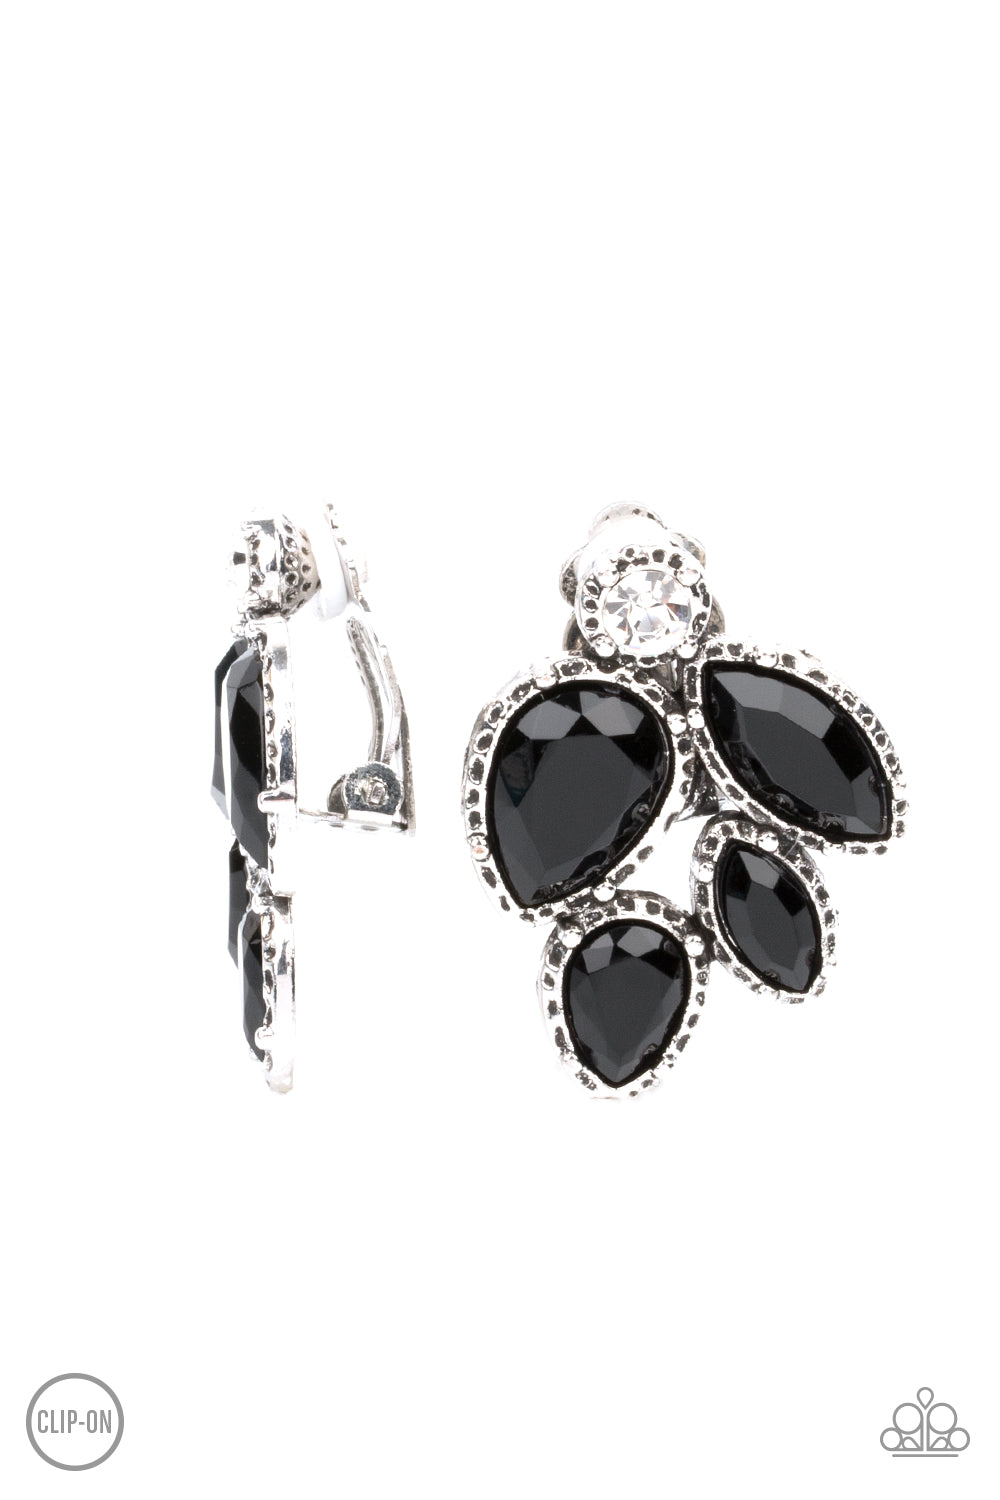 Fancy Foliage Black Clip-On Earring - Paparazzi Accessories.  Featuring a dainty white rhinestone, faceted black teardrop and marquise beads are pressed into hammered silver fittings that coalesce into a leafy frame. Earring attaches to a standard clip-on fitting.  ﻿﻿﻿All Paparazzi Accessories are lead free and nickel free!  Sold as one pair of clip-on earrings.